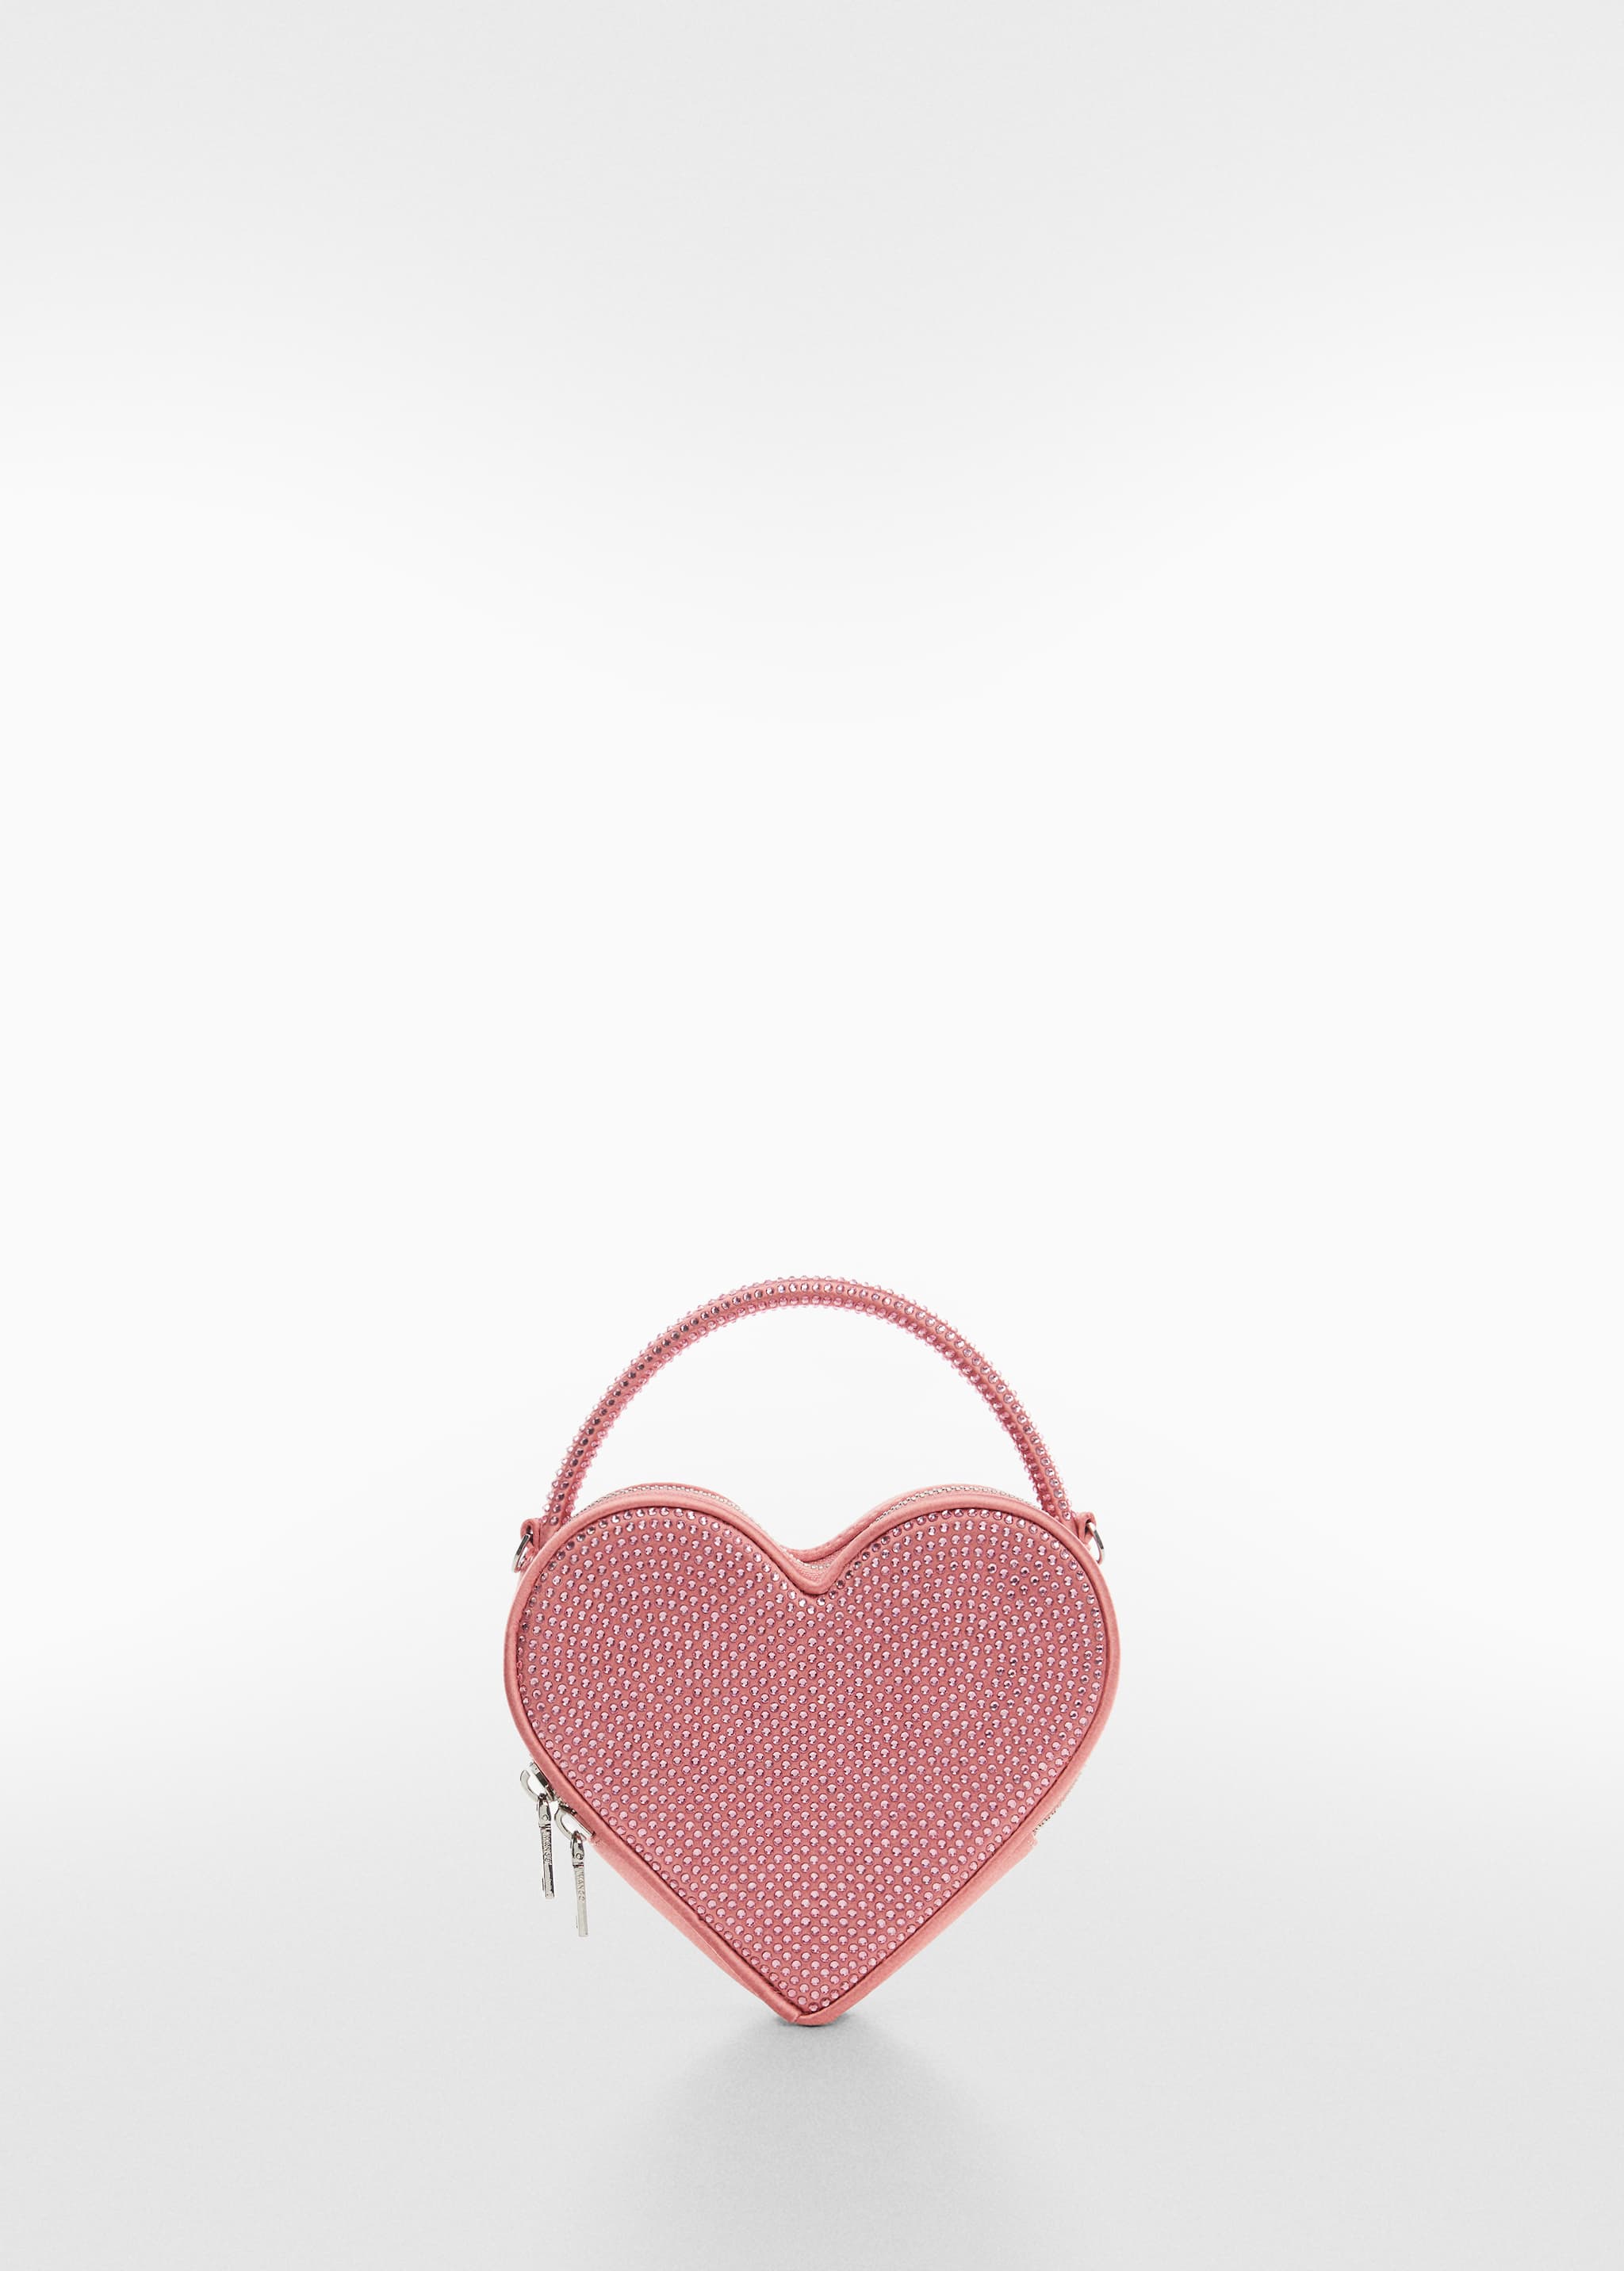 Crystal heart bag - Article without model